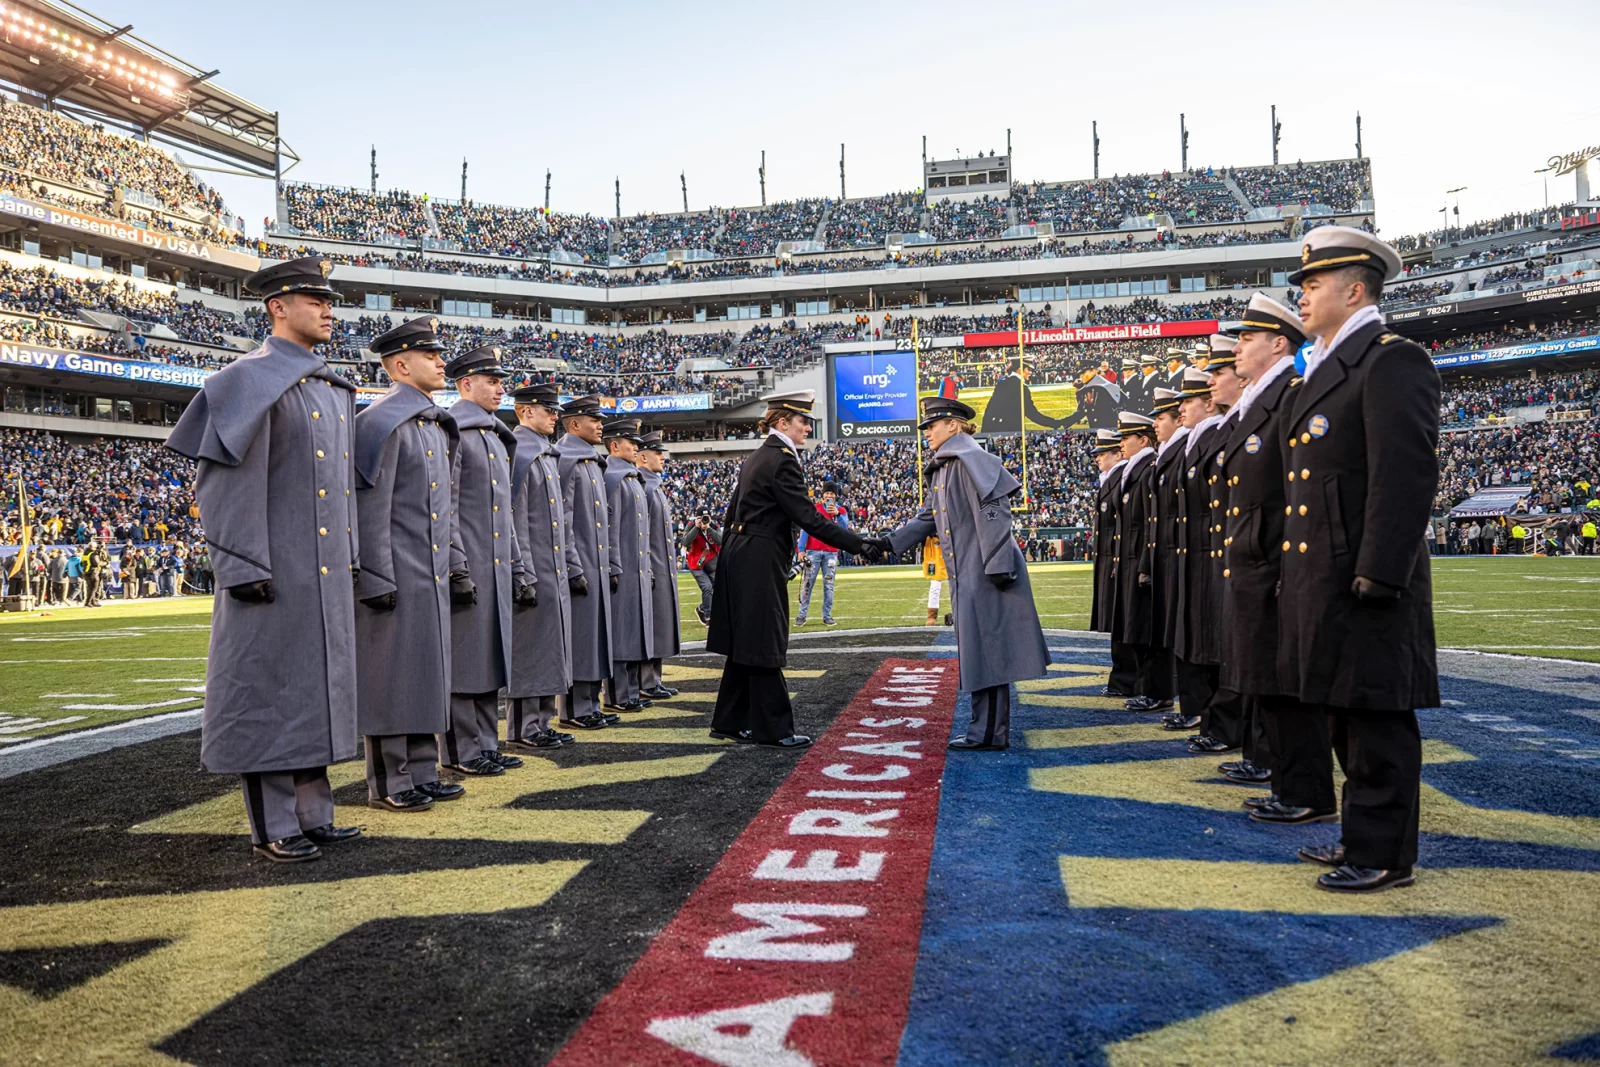 Army vs navy game, army vs navy, army navy game 2023 time, army vs navy, army vs navy game history, army vs navy game location details